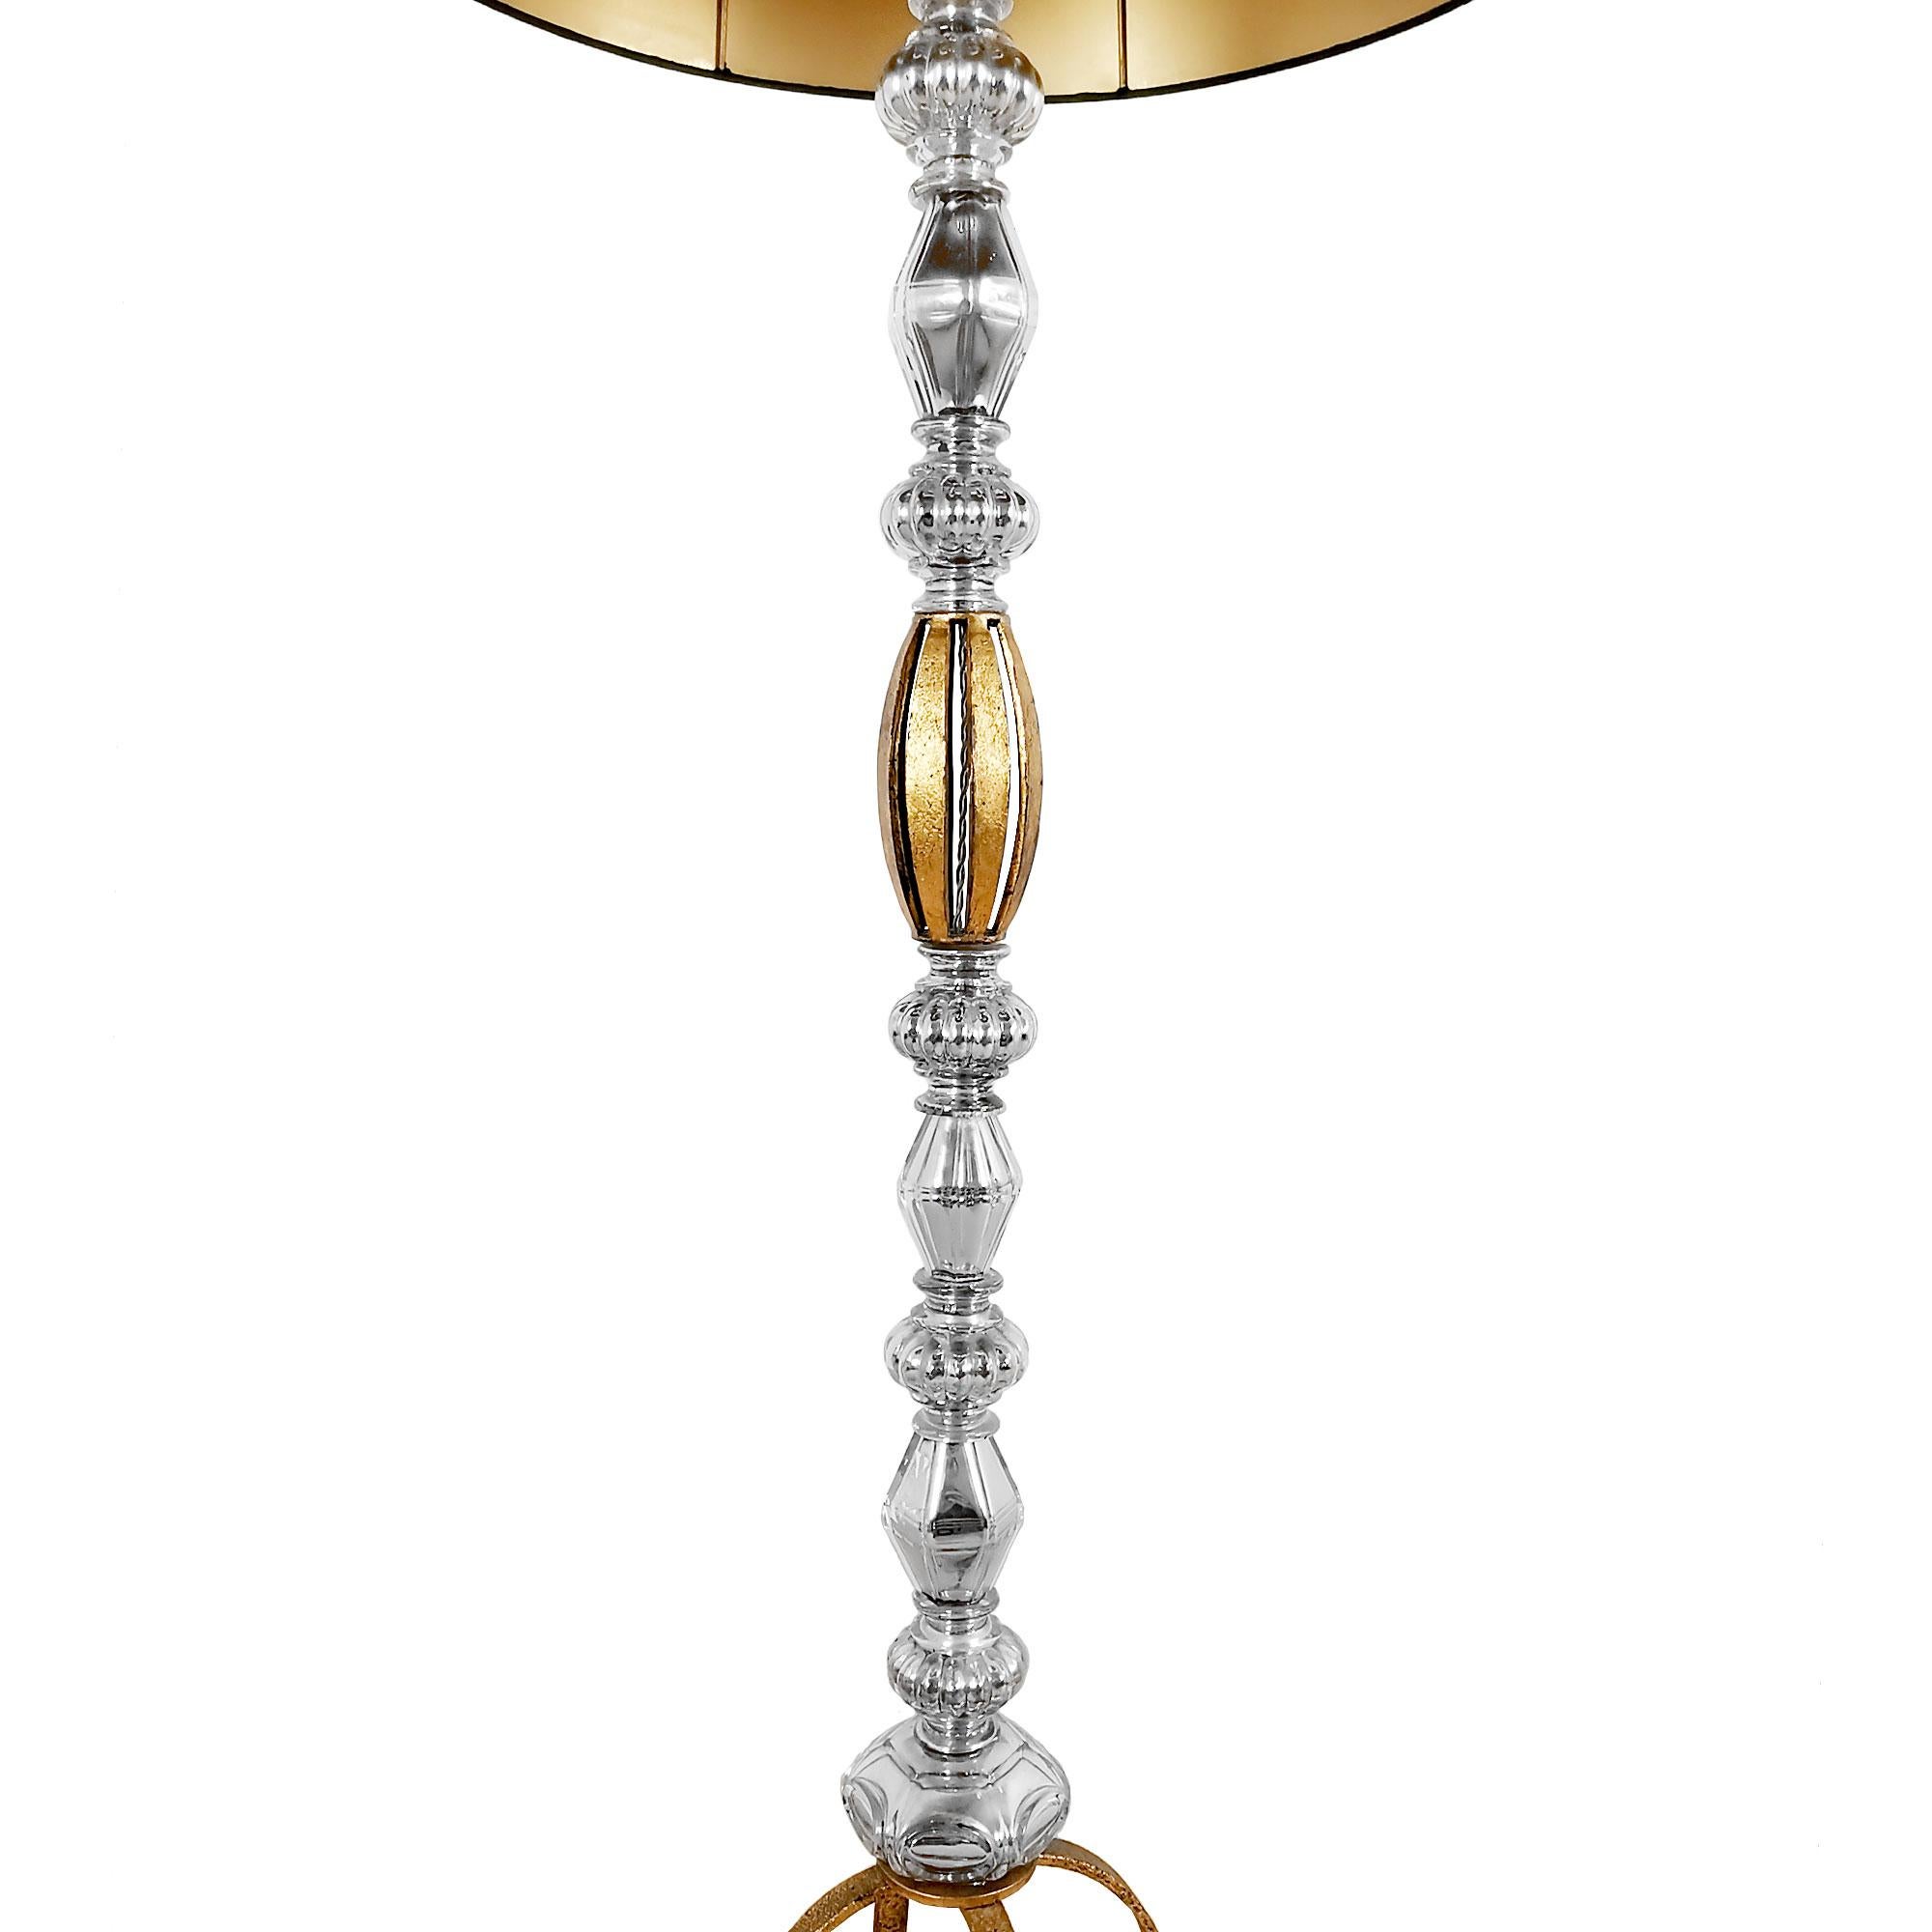 Mid-20th Century Mid-Century Modern Standing Lamp in Wrought Iron, Blown Glass, Brass - France  For Sale